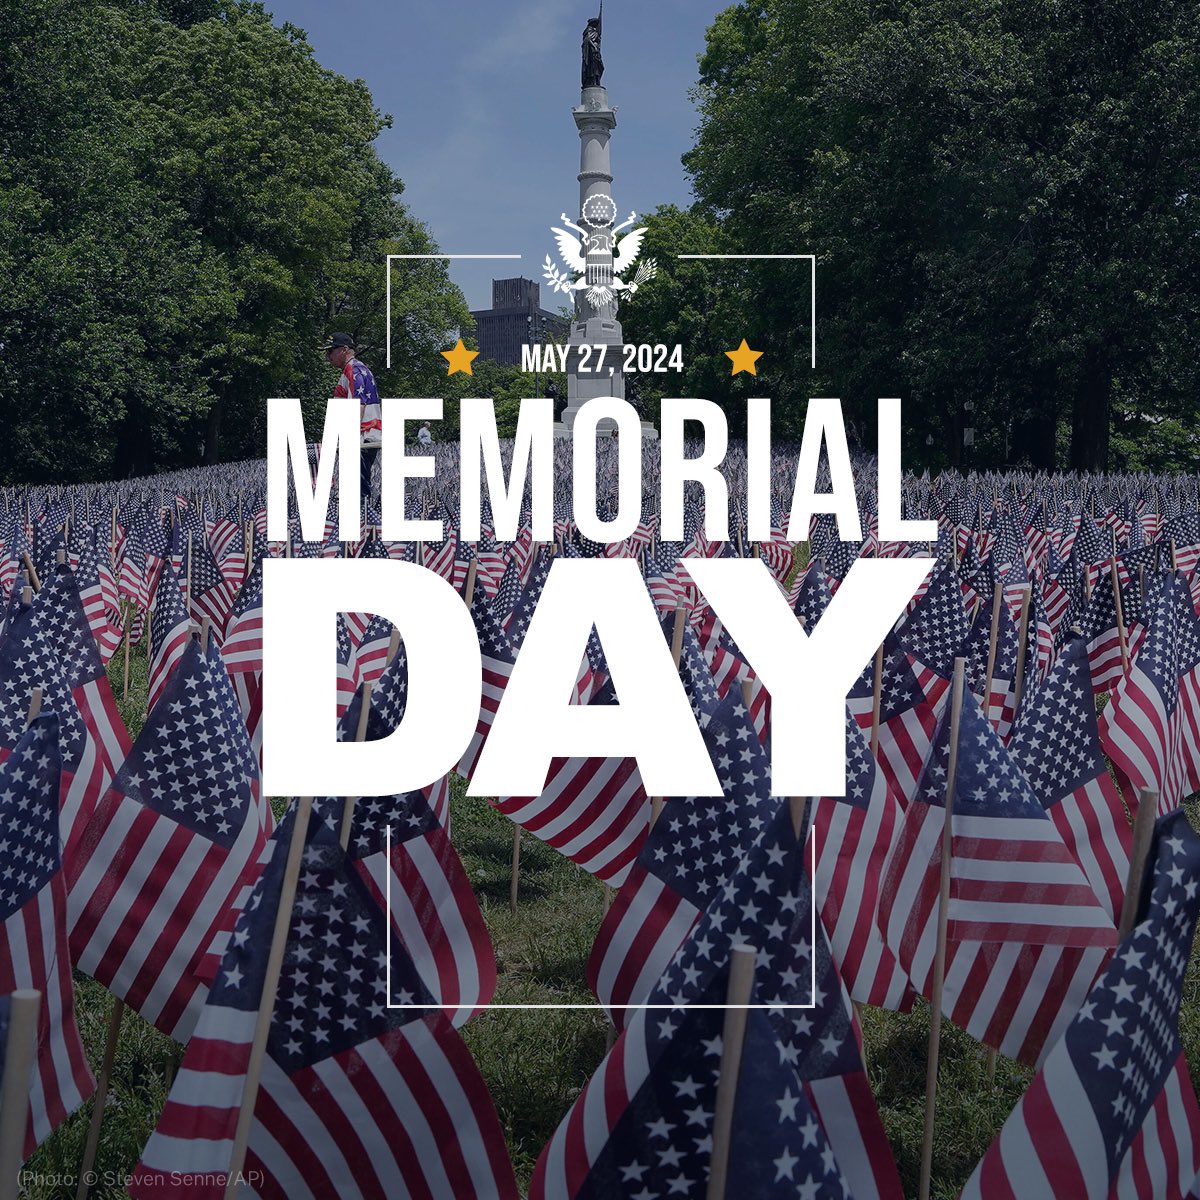 We honor the men and women who gave their lives in defense of ours. On this #MemorialDay and every day we remember their sacrifice, and we #HonorThem. We come together with a daily commitment to be worthy of the price that was paid for freedom. #WeAreNATO